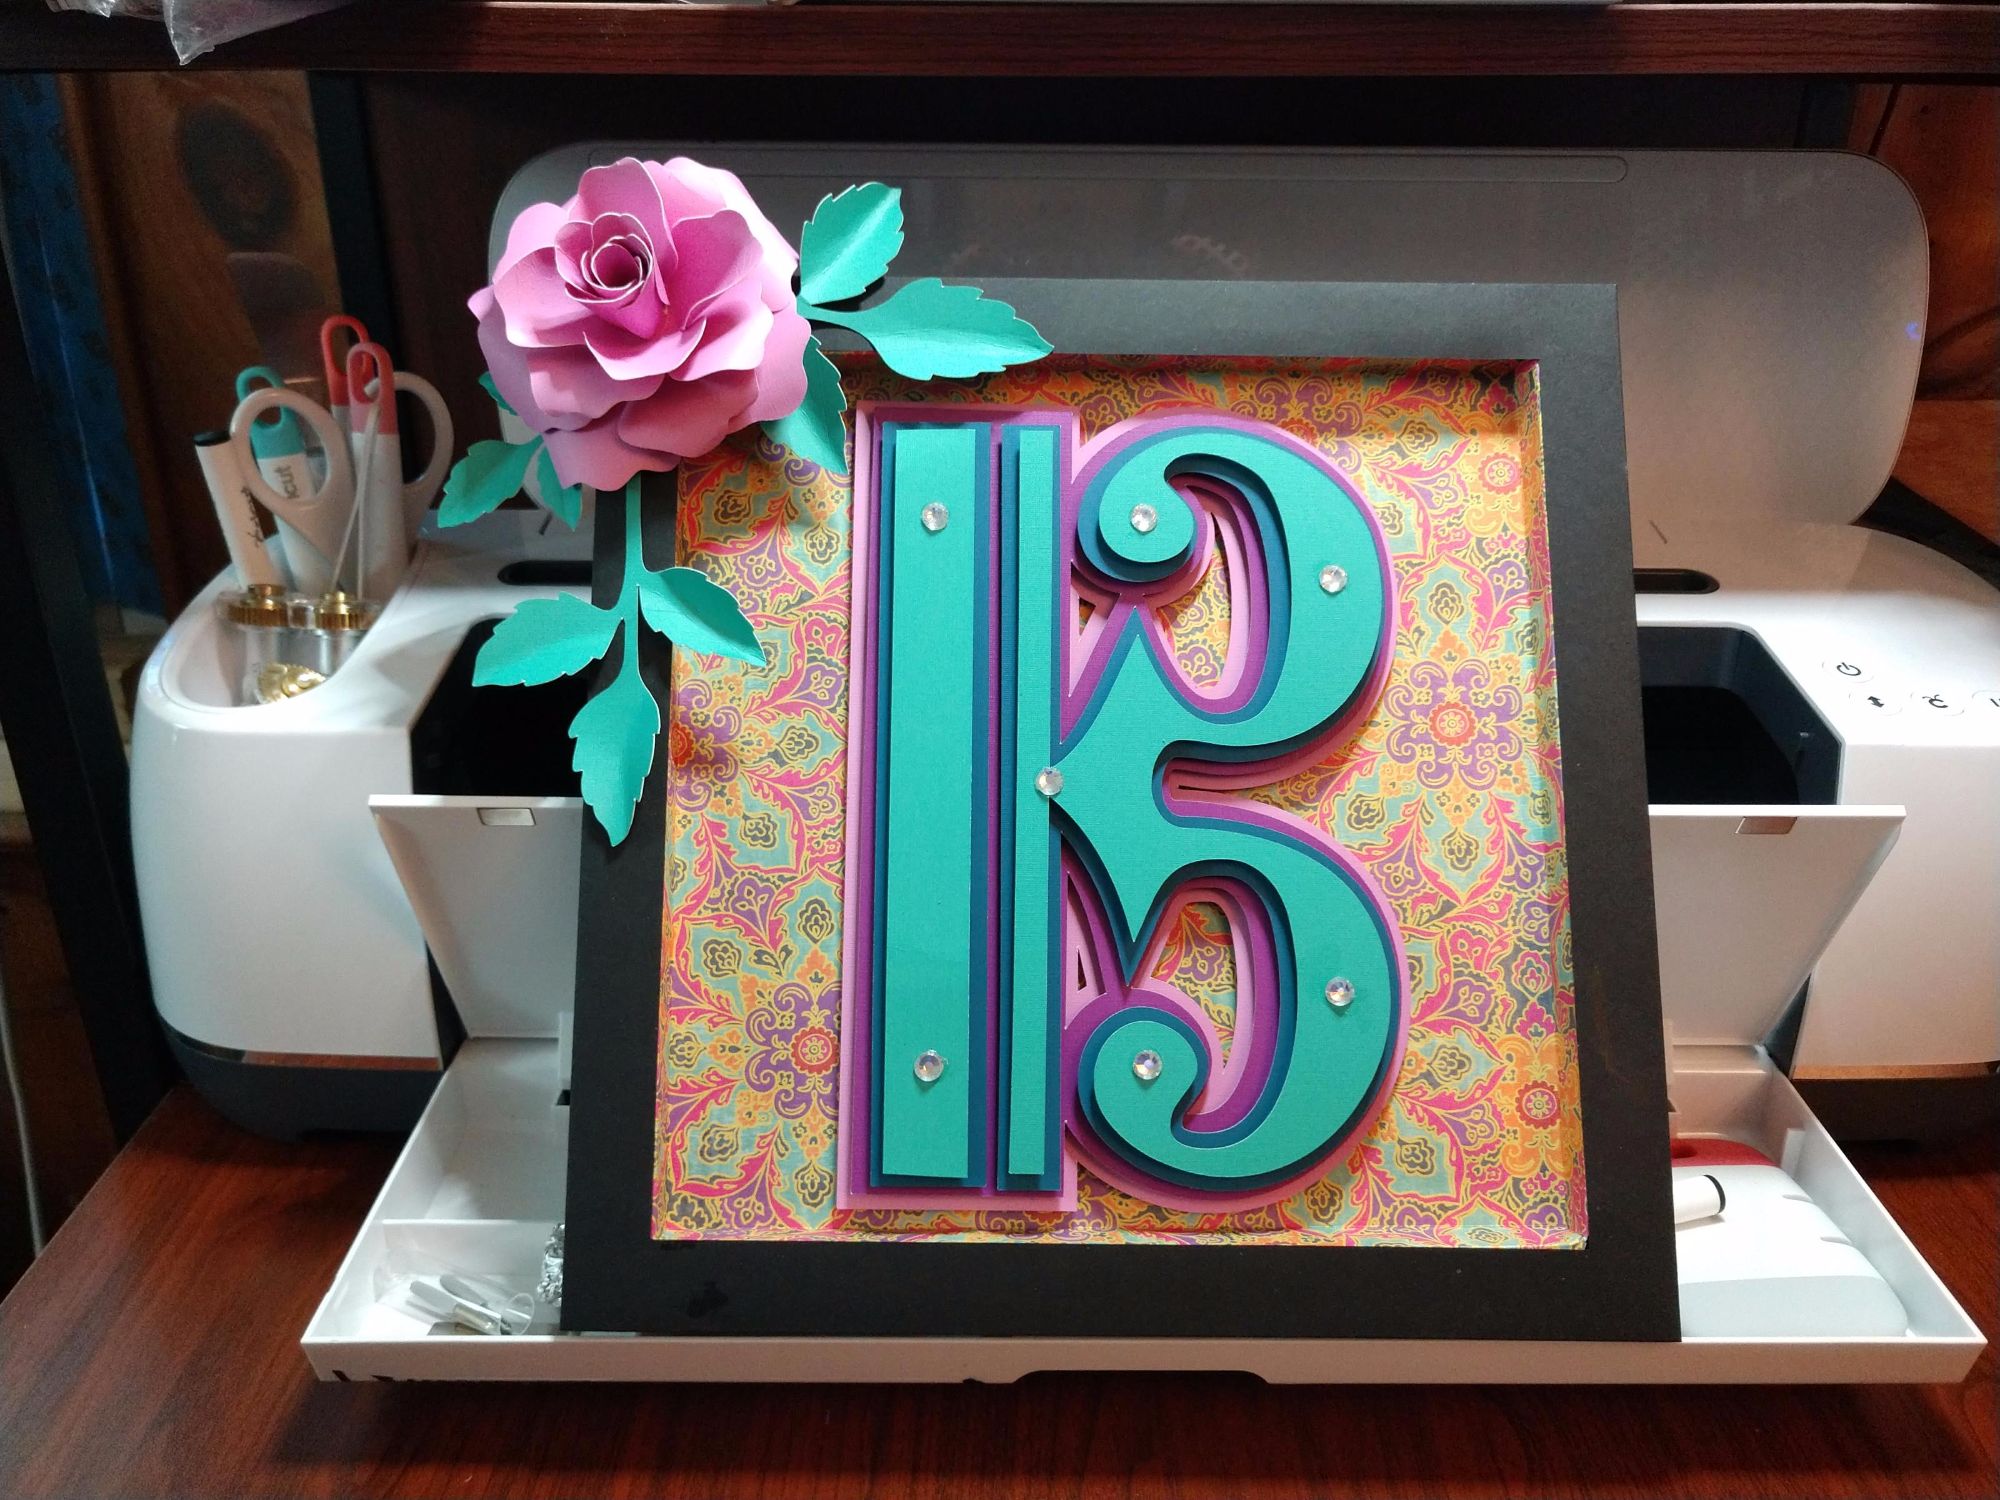 Alto clef within a frame in bright colors of teal, blue, purple, and pink, with a large pink flowers at upper left on frame